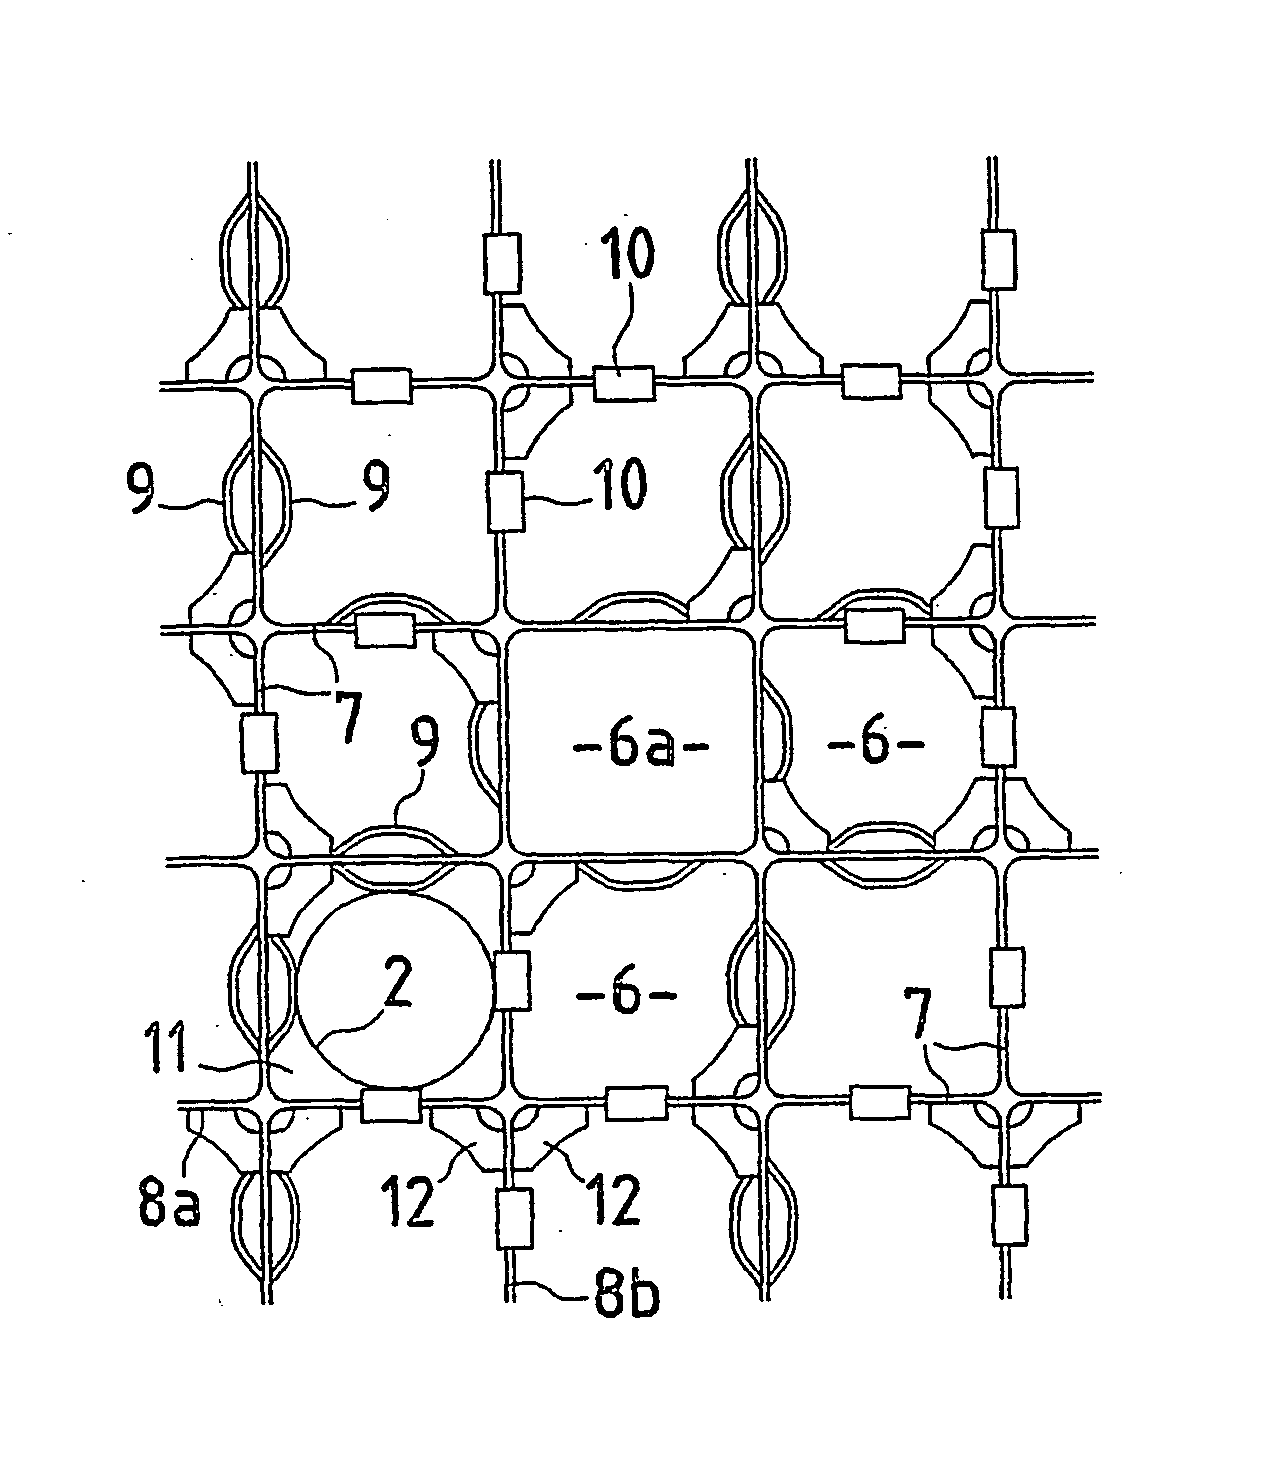 Spacer grid for a fuel unit in a nuclear reactor cooled by light water